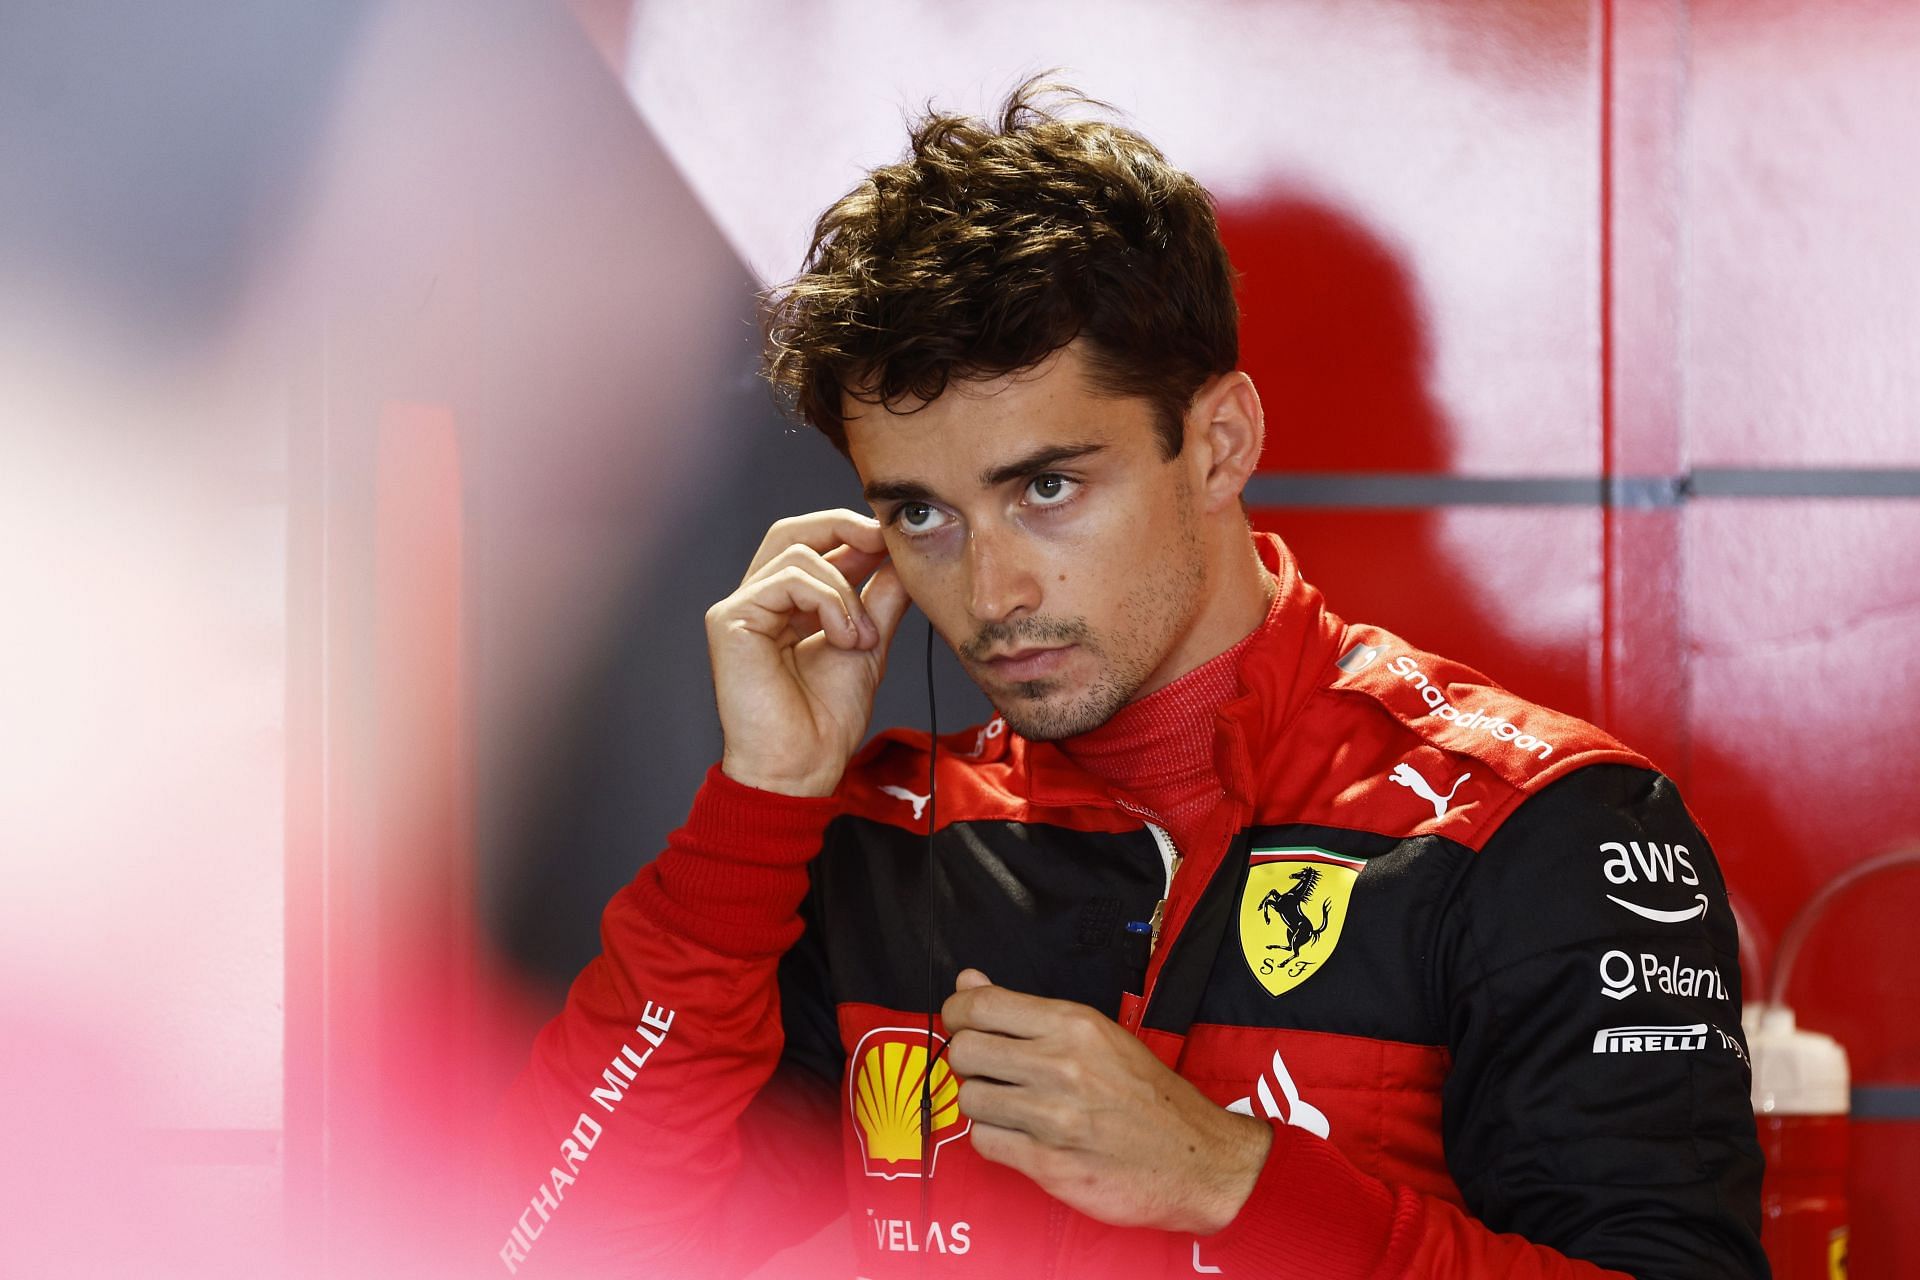 Charles Leclerc prepares to drive in the garage before practice ahead of the 2022 Miami GP (Photo by Jared C. Tilton/Getty Images)